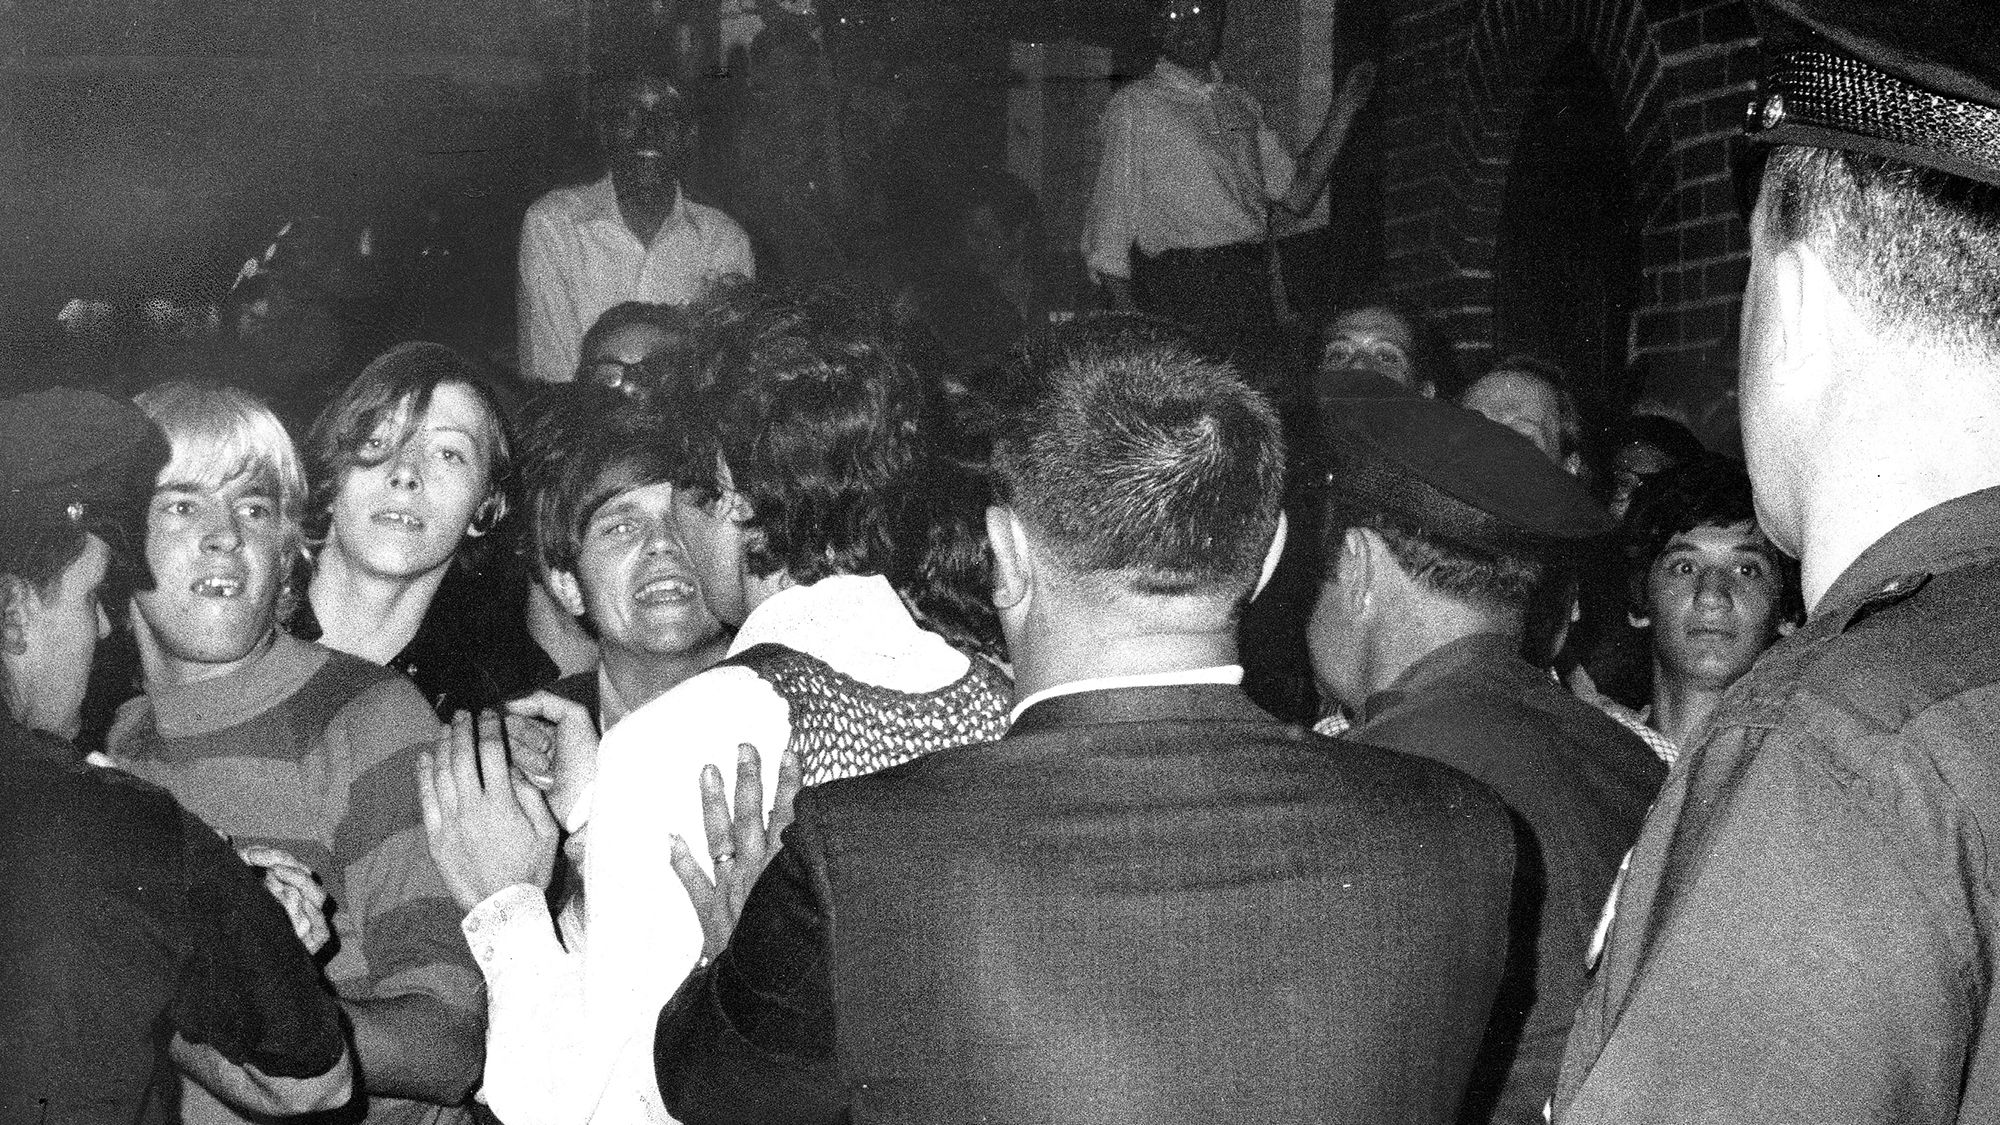 LGBTQ Bars Feel Like Home 50 Years After Stonewall